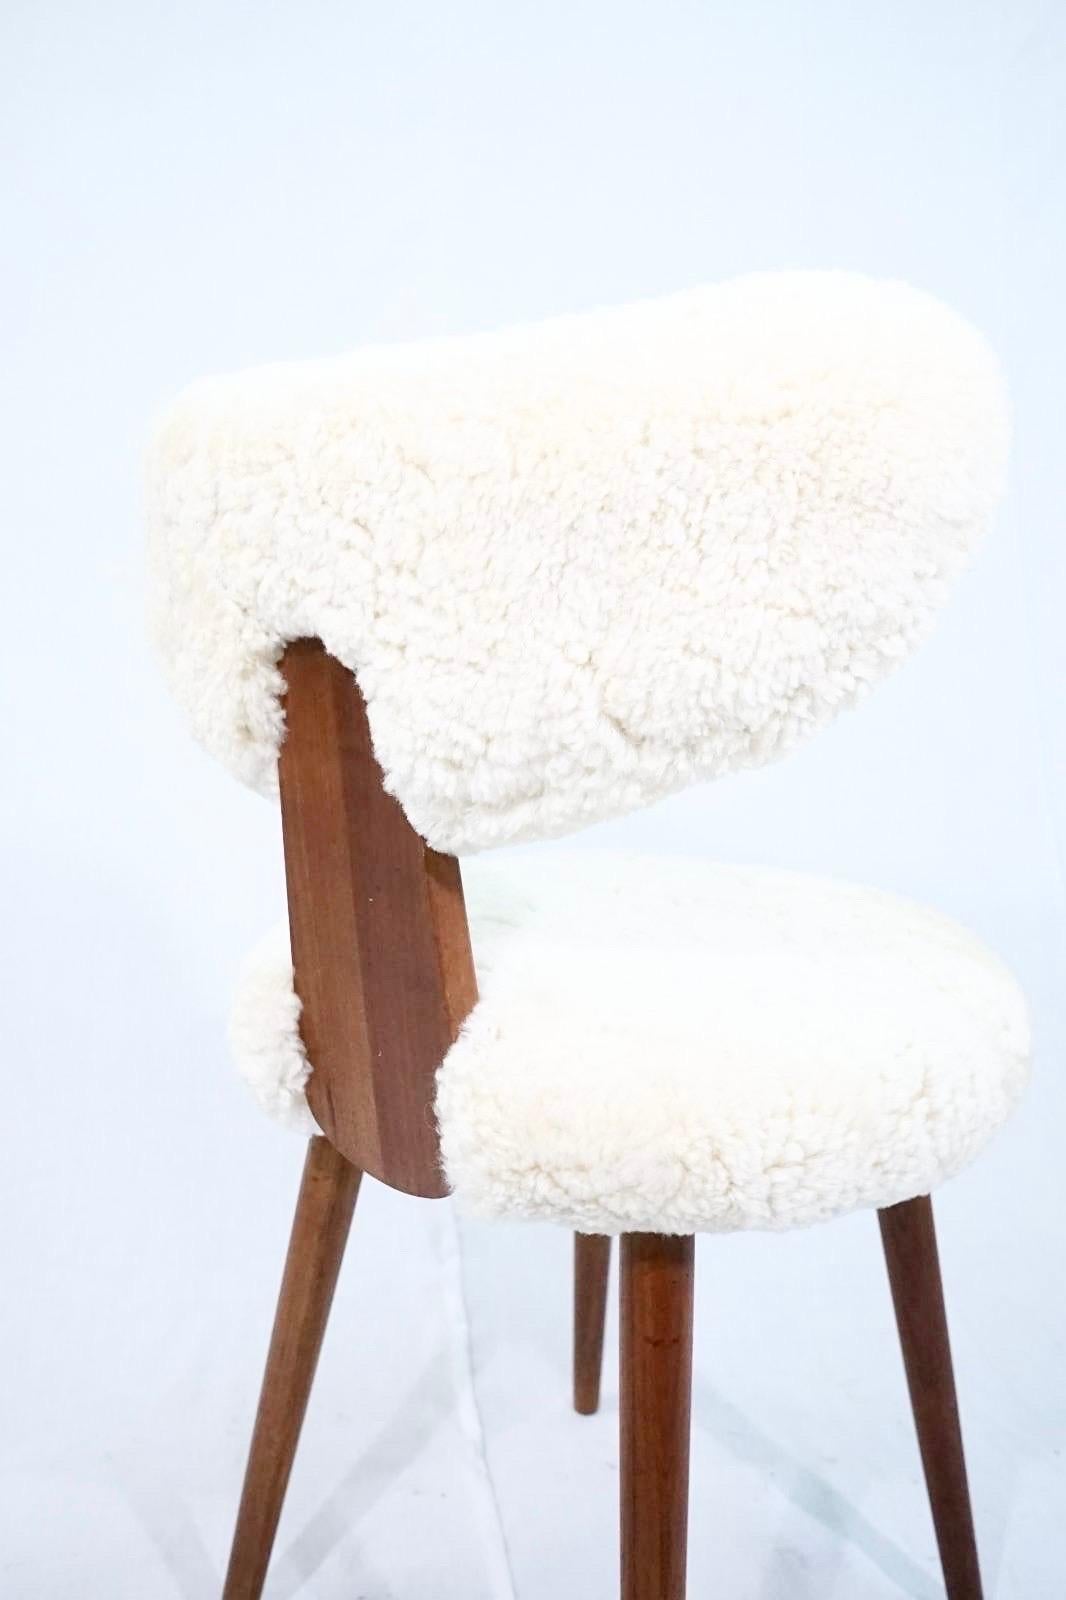 Rare Scandinavian vanity table chair in solid teak with lambs wool in the manner of Magnus Stephensen.
The chair is newly restored and has been reupholstered in shearling lambs wool by a professional danish upholster.
The chairs backrest is